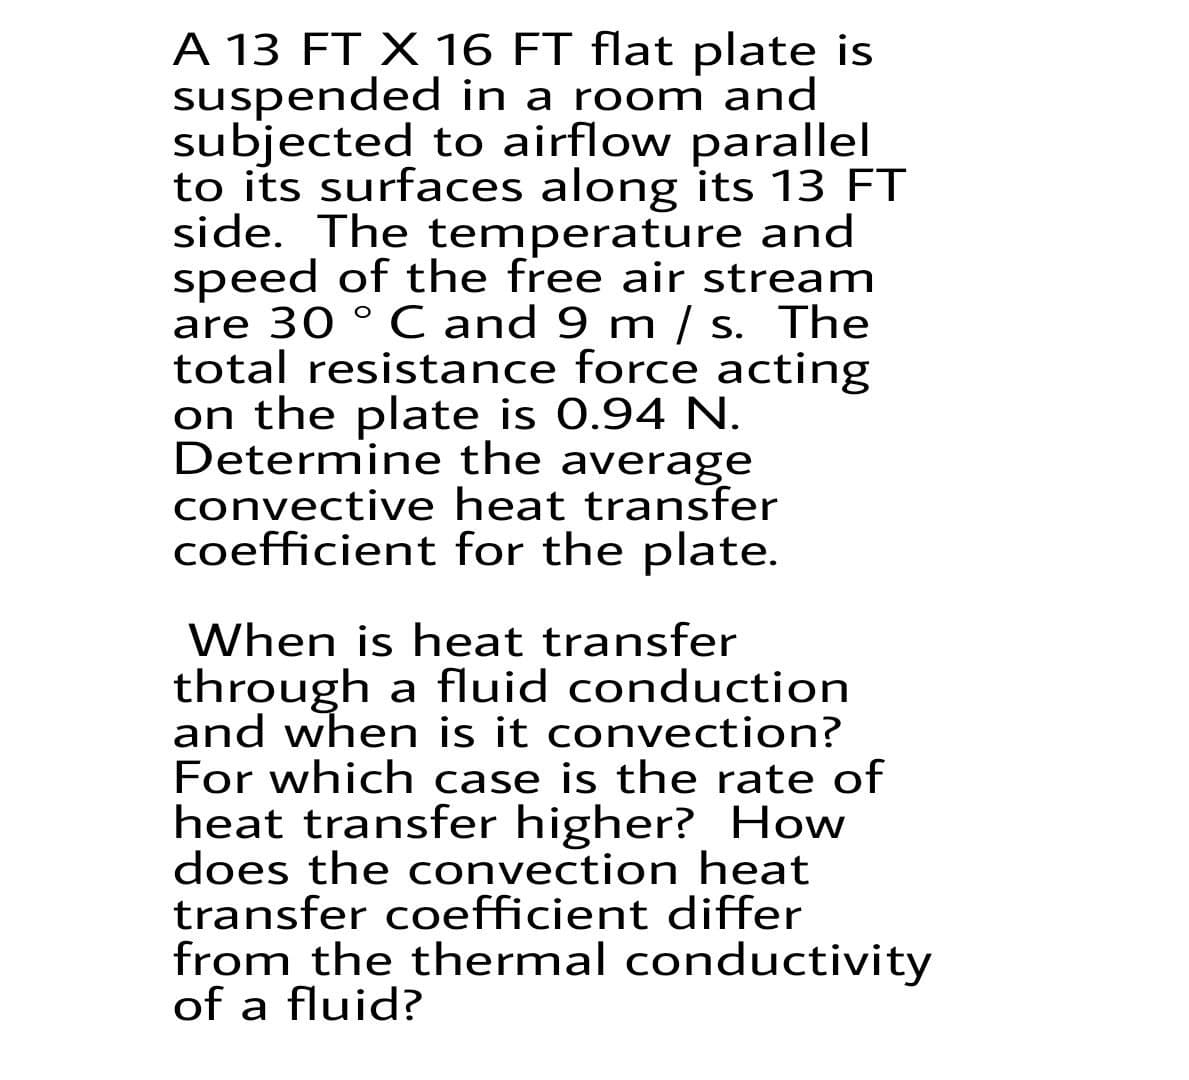 A 13 FT X 16 FT flat plate is
suspended in a room and
subjected to airflow parallel
to its surfaces along its 13 FT
side. The temperature and
speed of the free air stream
are 30 ° C and 9 m / s. The
total resistance force acting
on the plate is 0.94 N.
Determine the average
convective heat transfer
coefficient for the plate.
When is heat transfer
through a fluid conduction
and when is it convection?
For which case is the rate of
heat transfer higher? How
does the convection heat
transfer coefficient differ
from the thermal conductivity
of a fluid?
